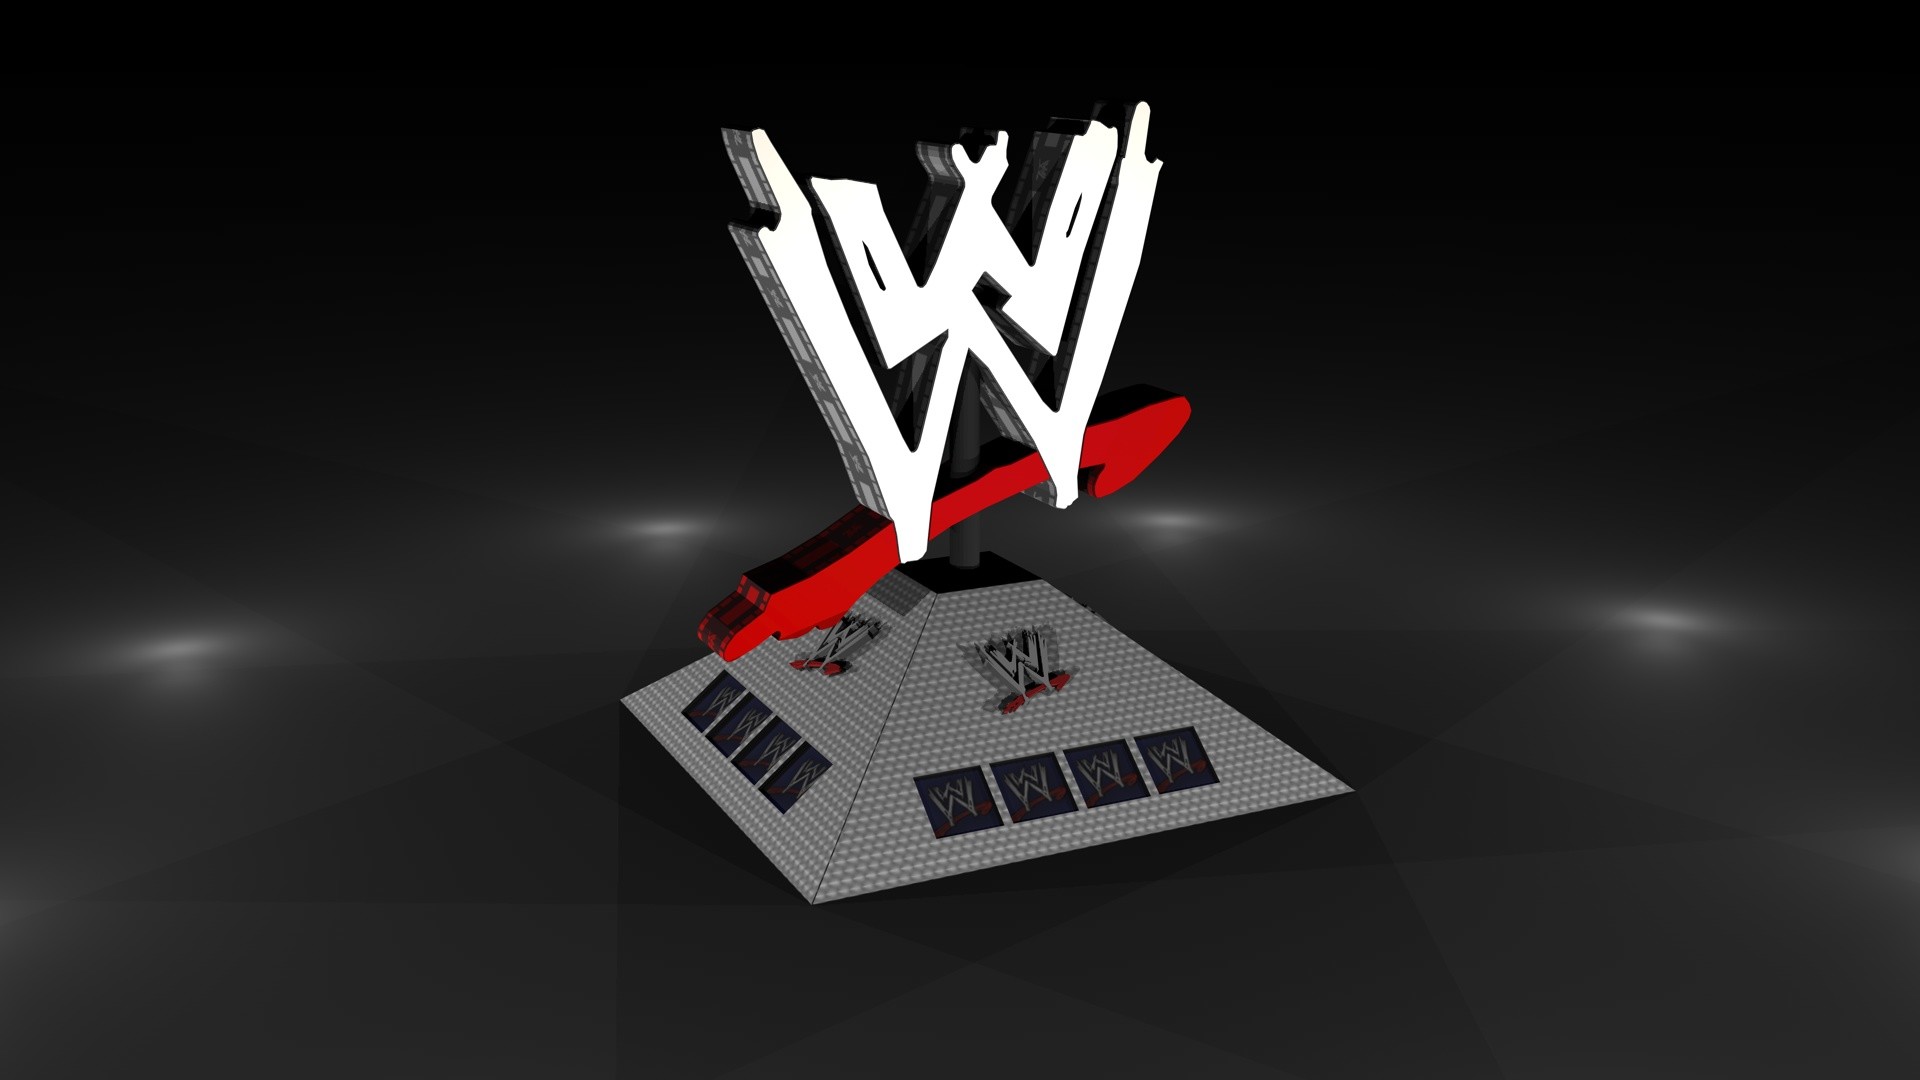 1920x1080 WWE Full HD Background http://wallpapers-and-backgrounds.net/